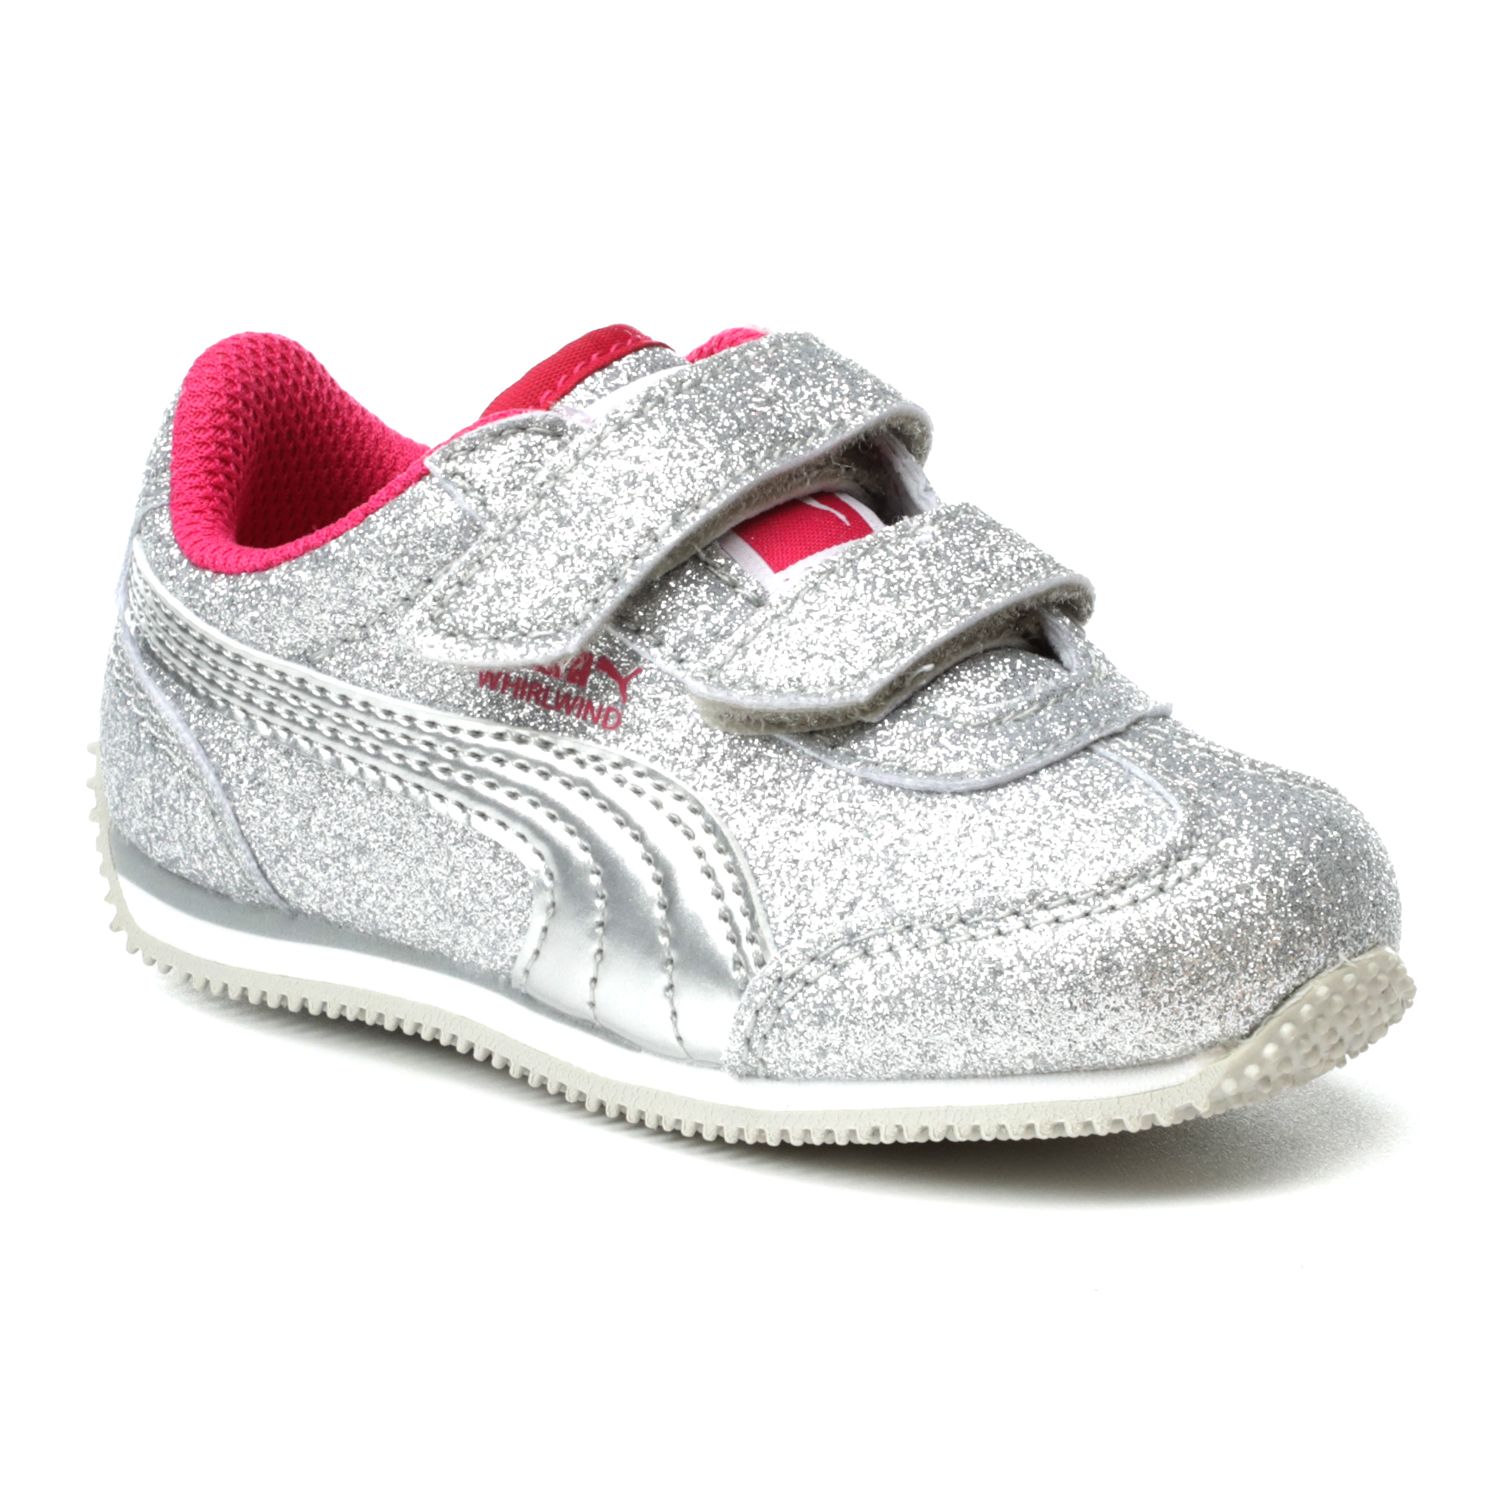 puma toddler girl shoes